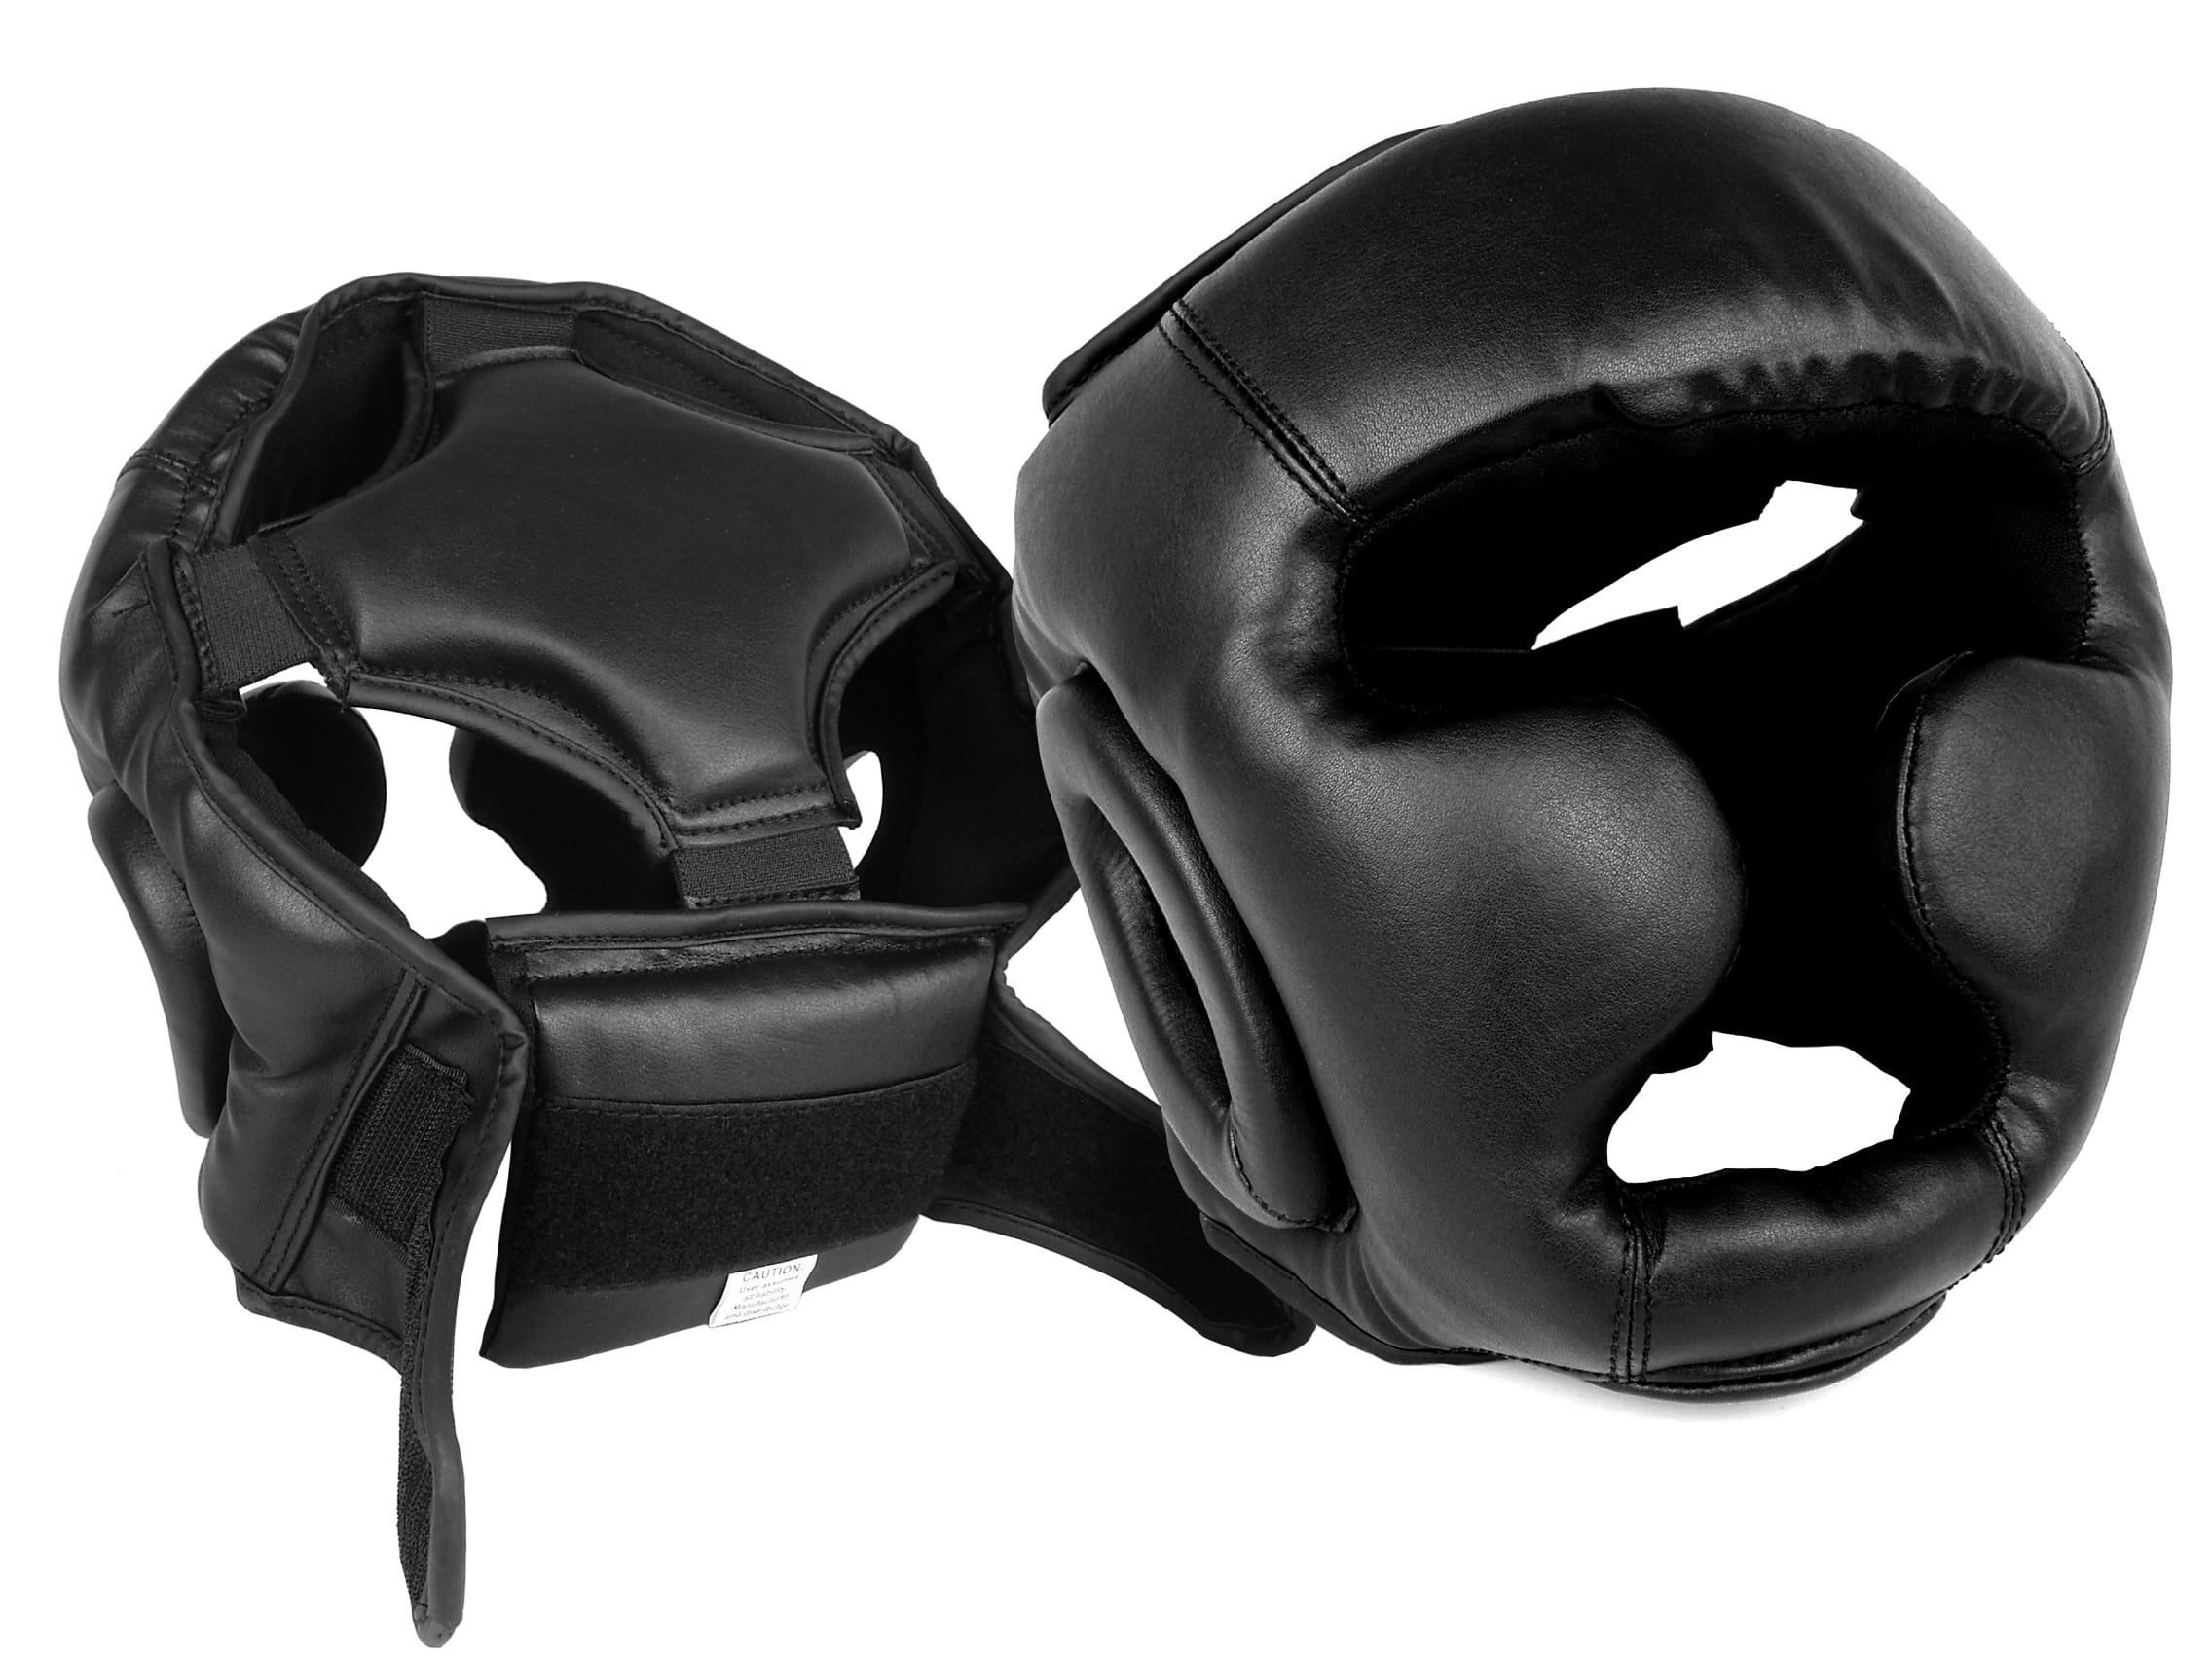 MMA Head Guard PU Leather Sparring Helmet for Kickboxing Wrestling,Mixed Martial Arts Boxing UFC Boxing Headgear 